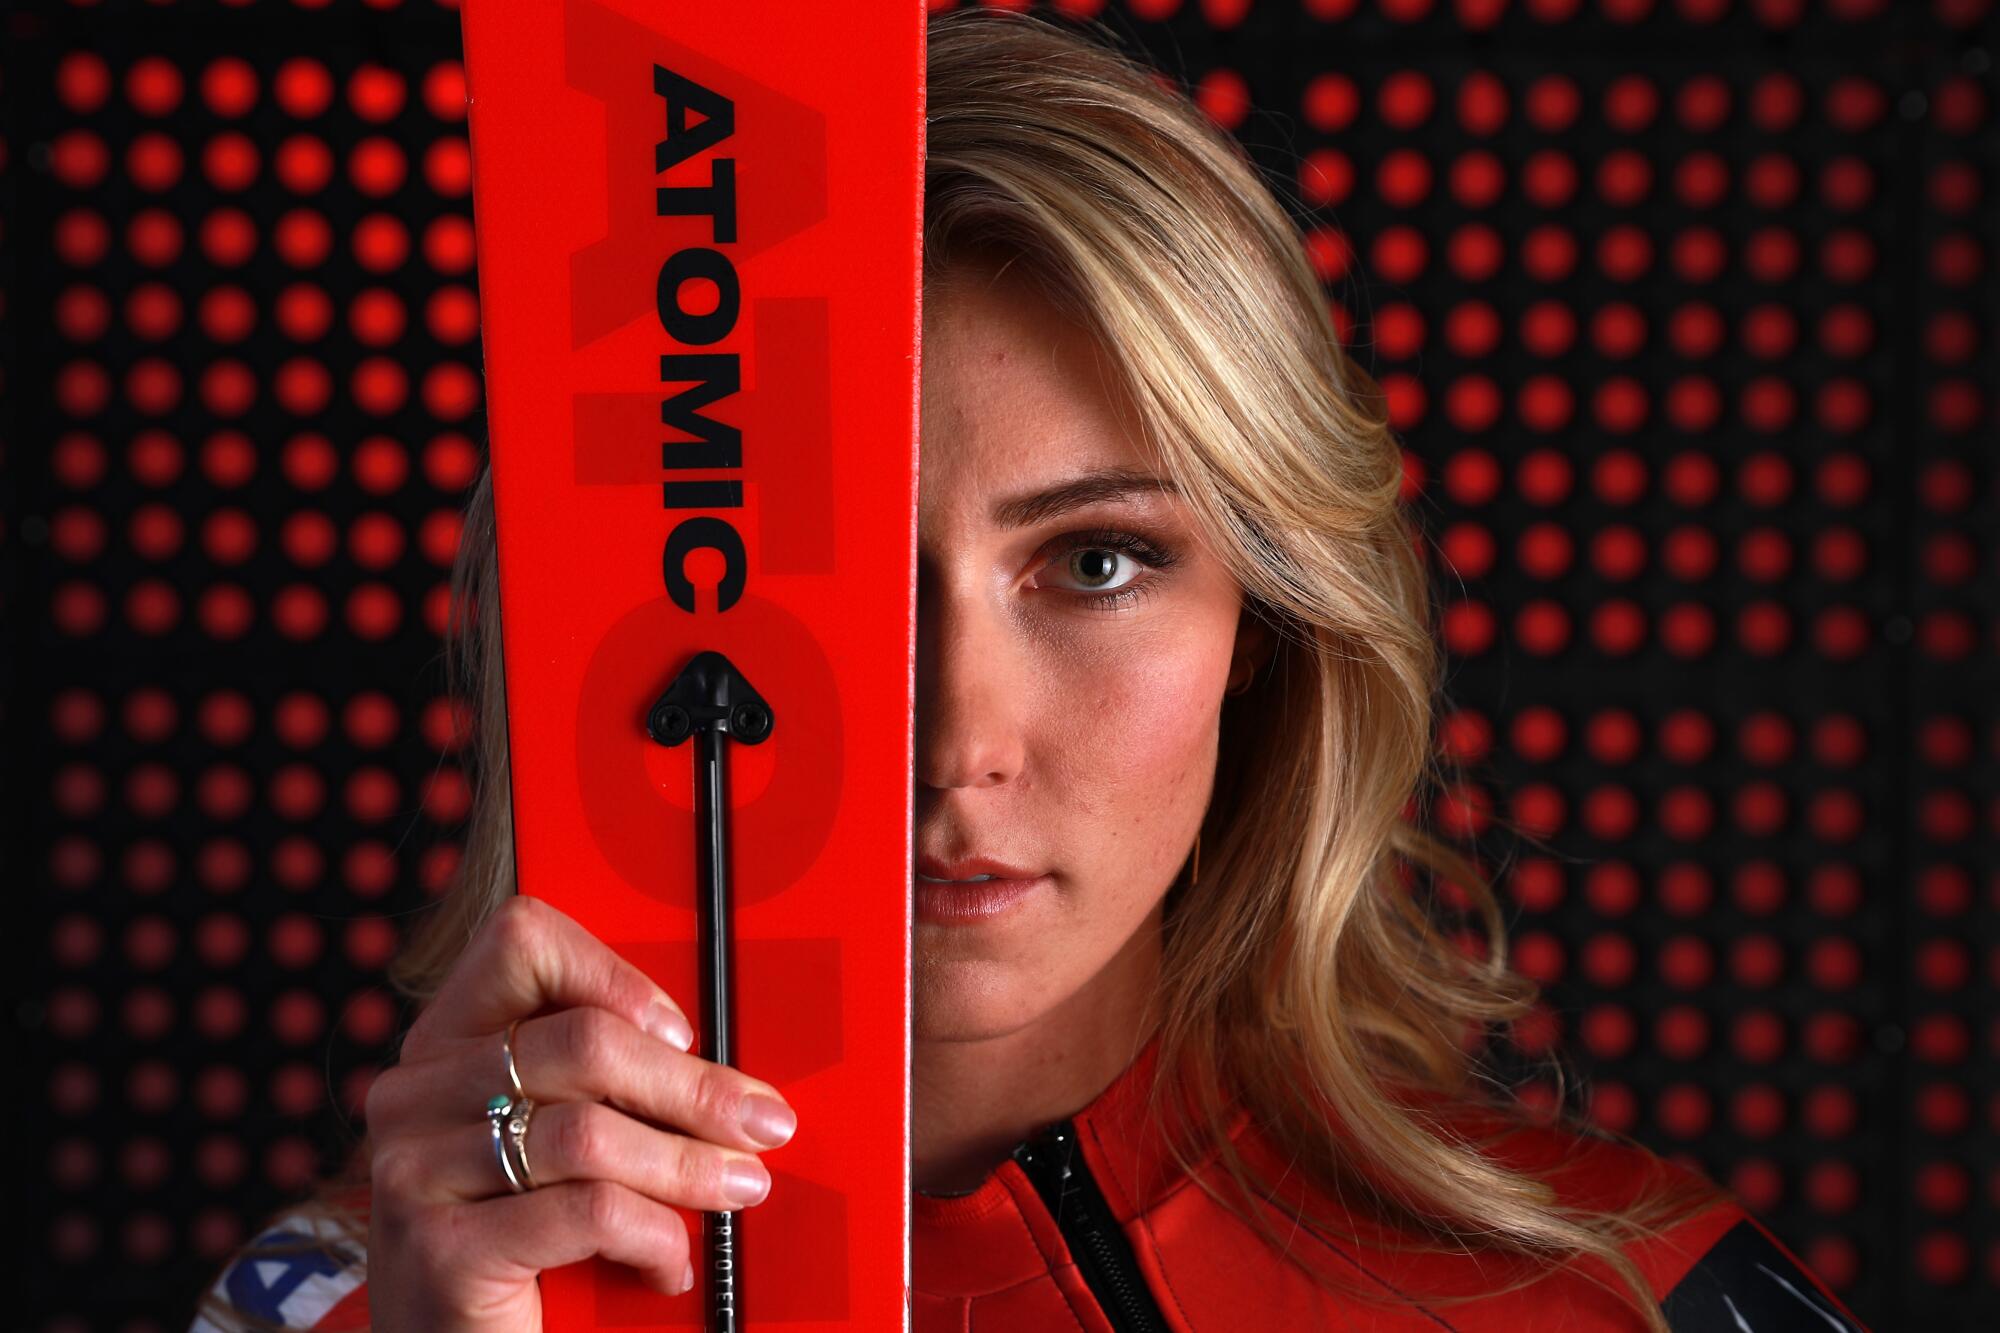 Alpine skier Mikaela Shiffrin poses for a portrait during the Team USA Media Summit ahead of the PyeongChang 2018 Olympic Winter Games on September 25, 2017 in Park City, Utah. 